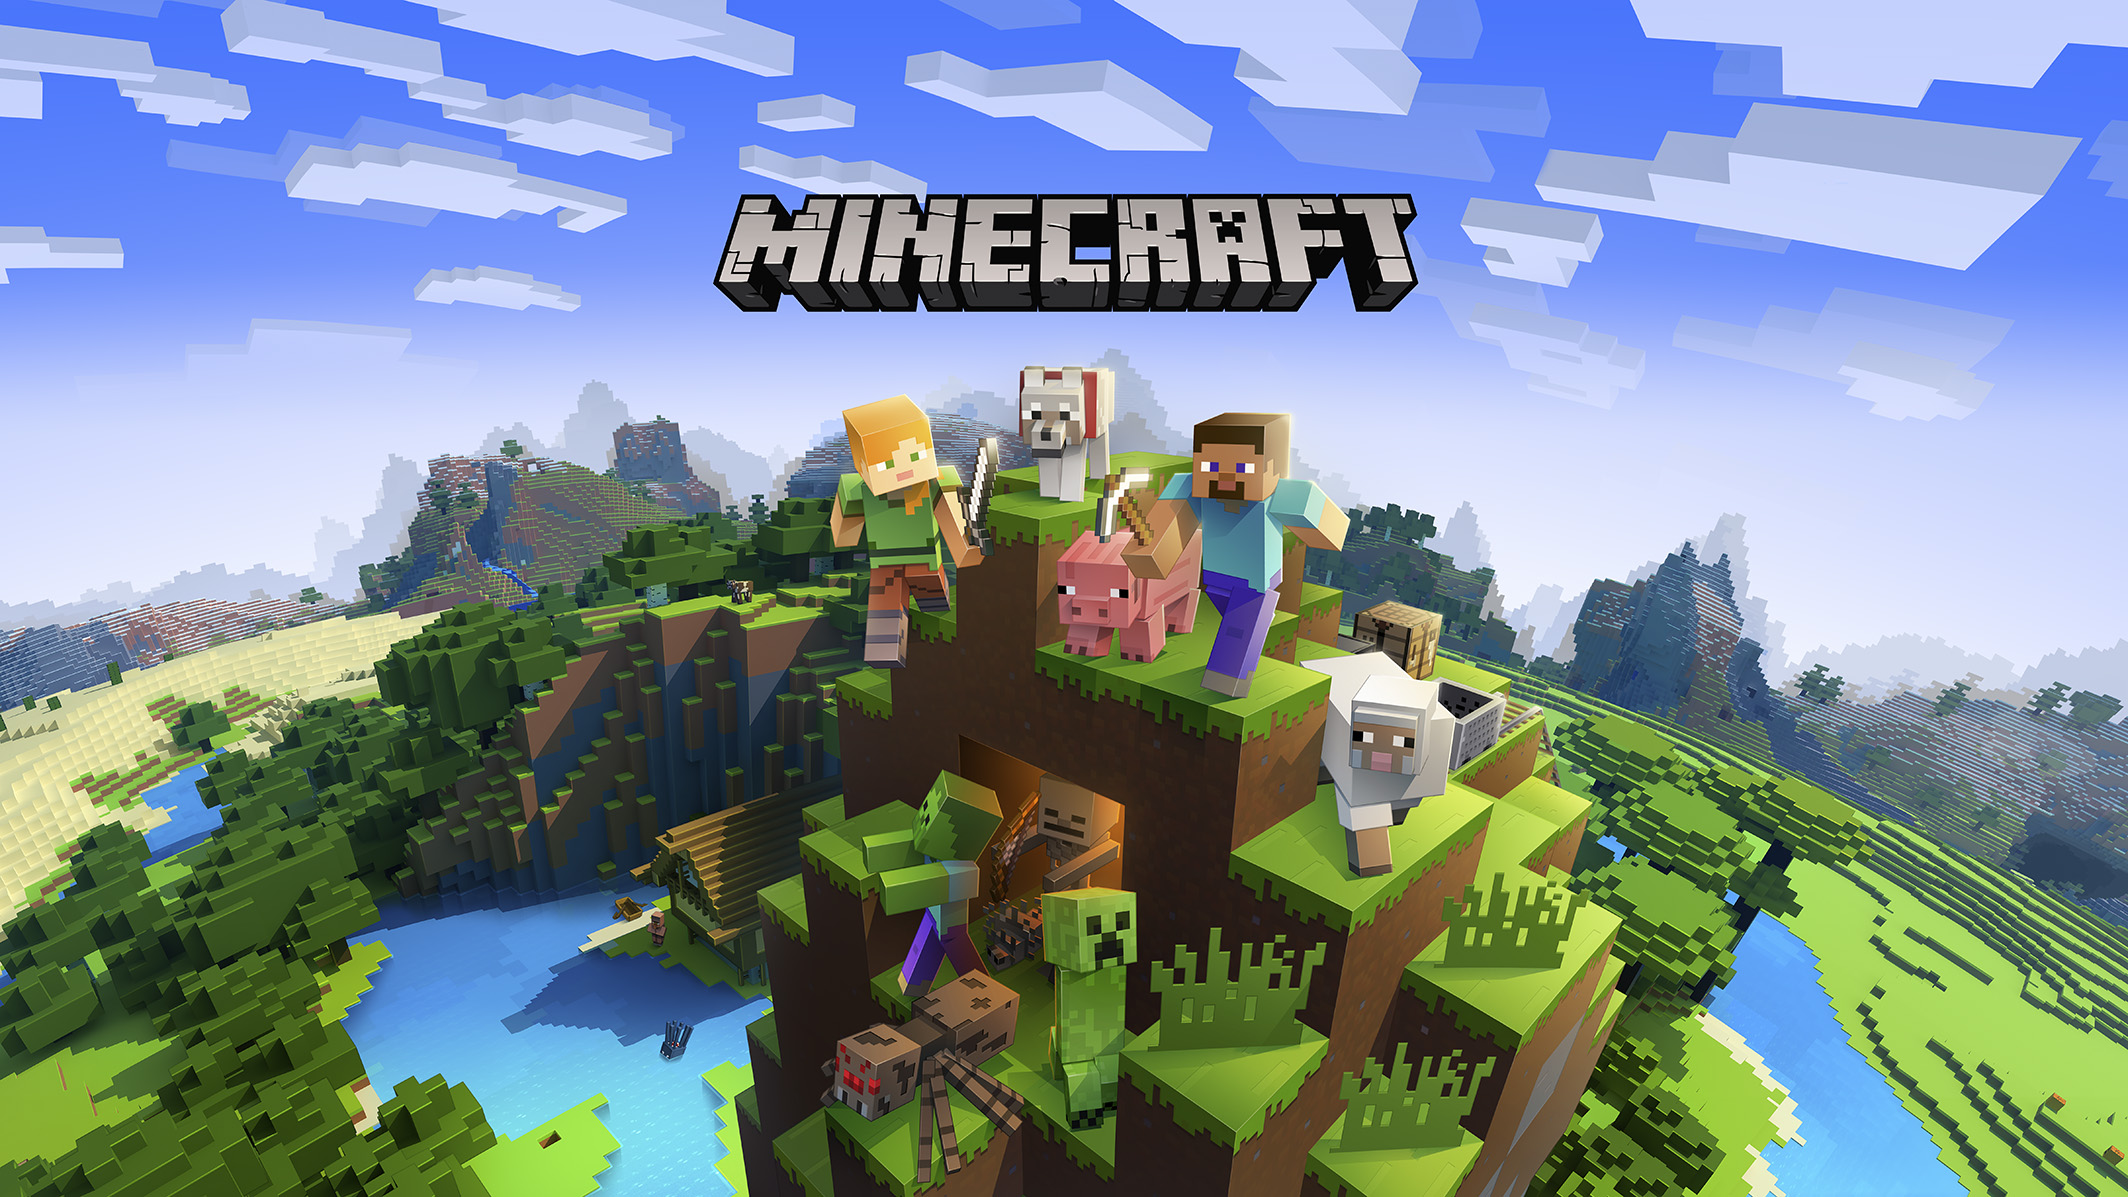 Minecraft mobile builds towards desktop version with latest update